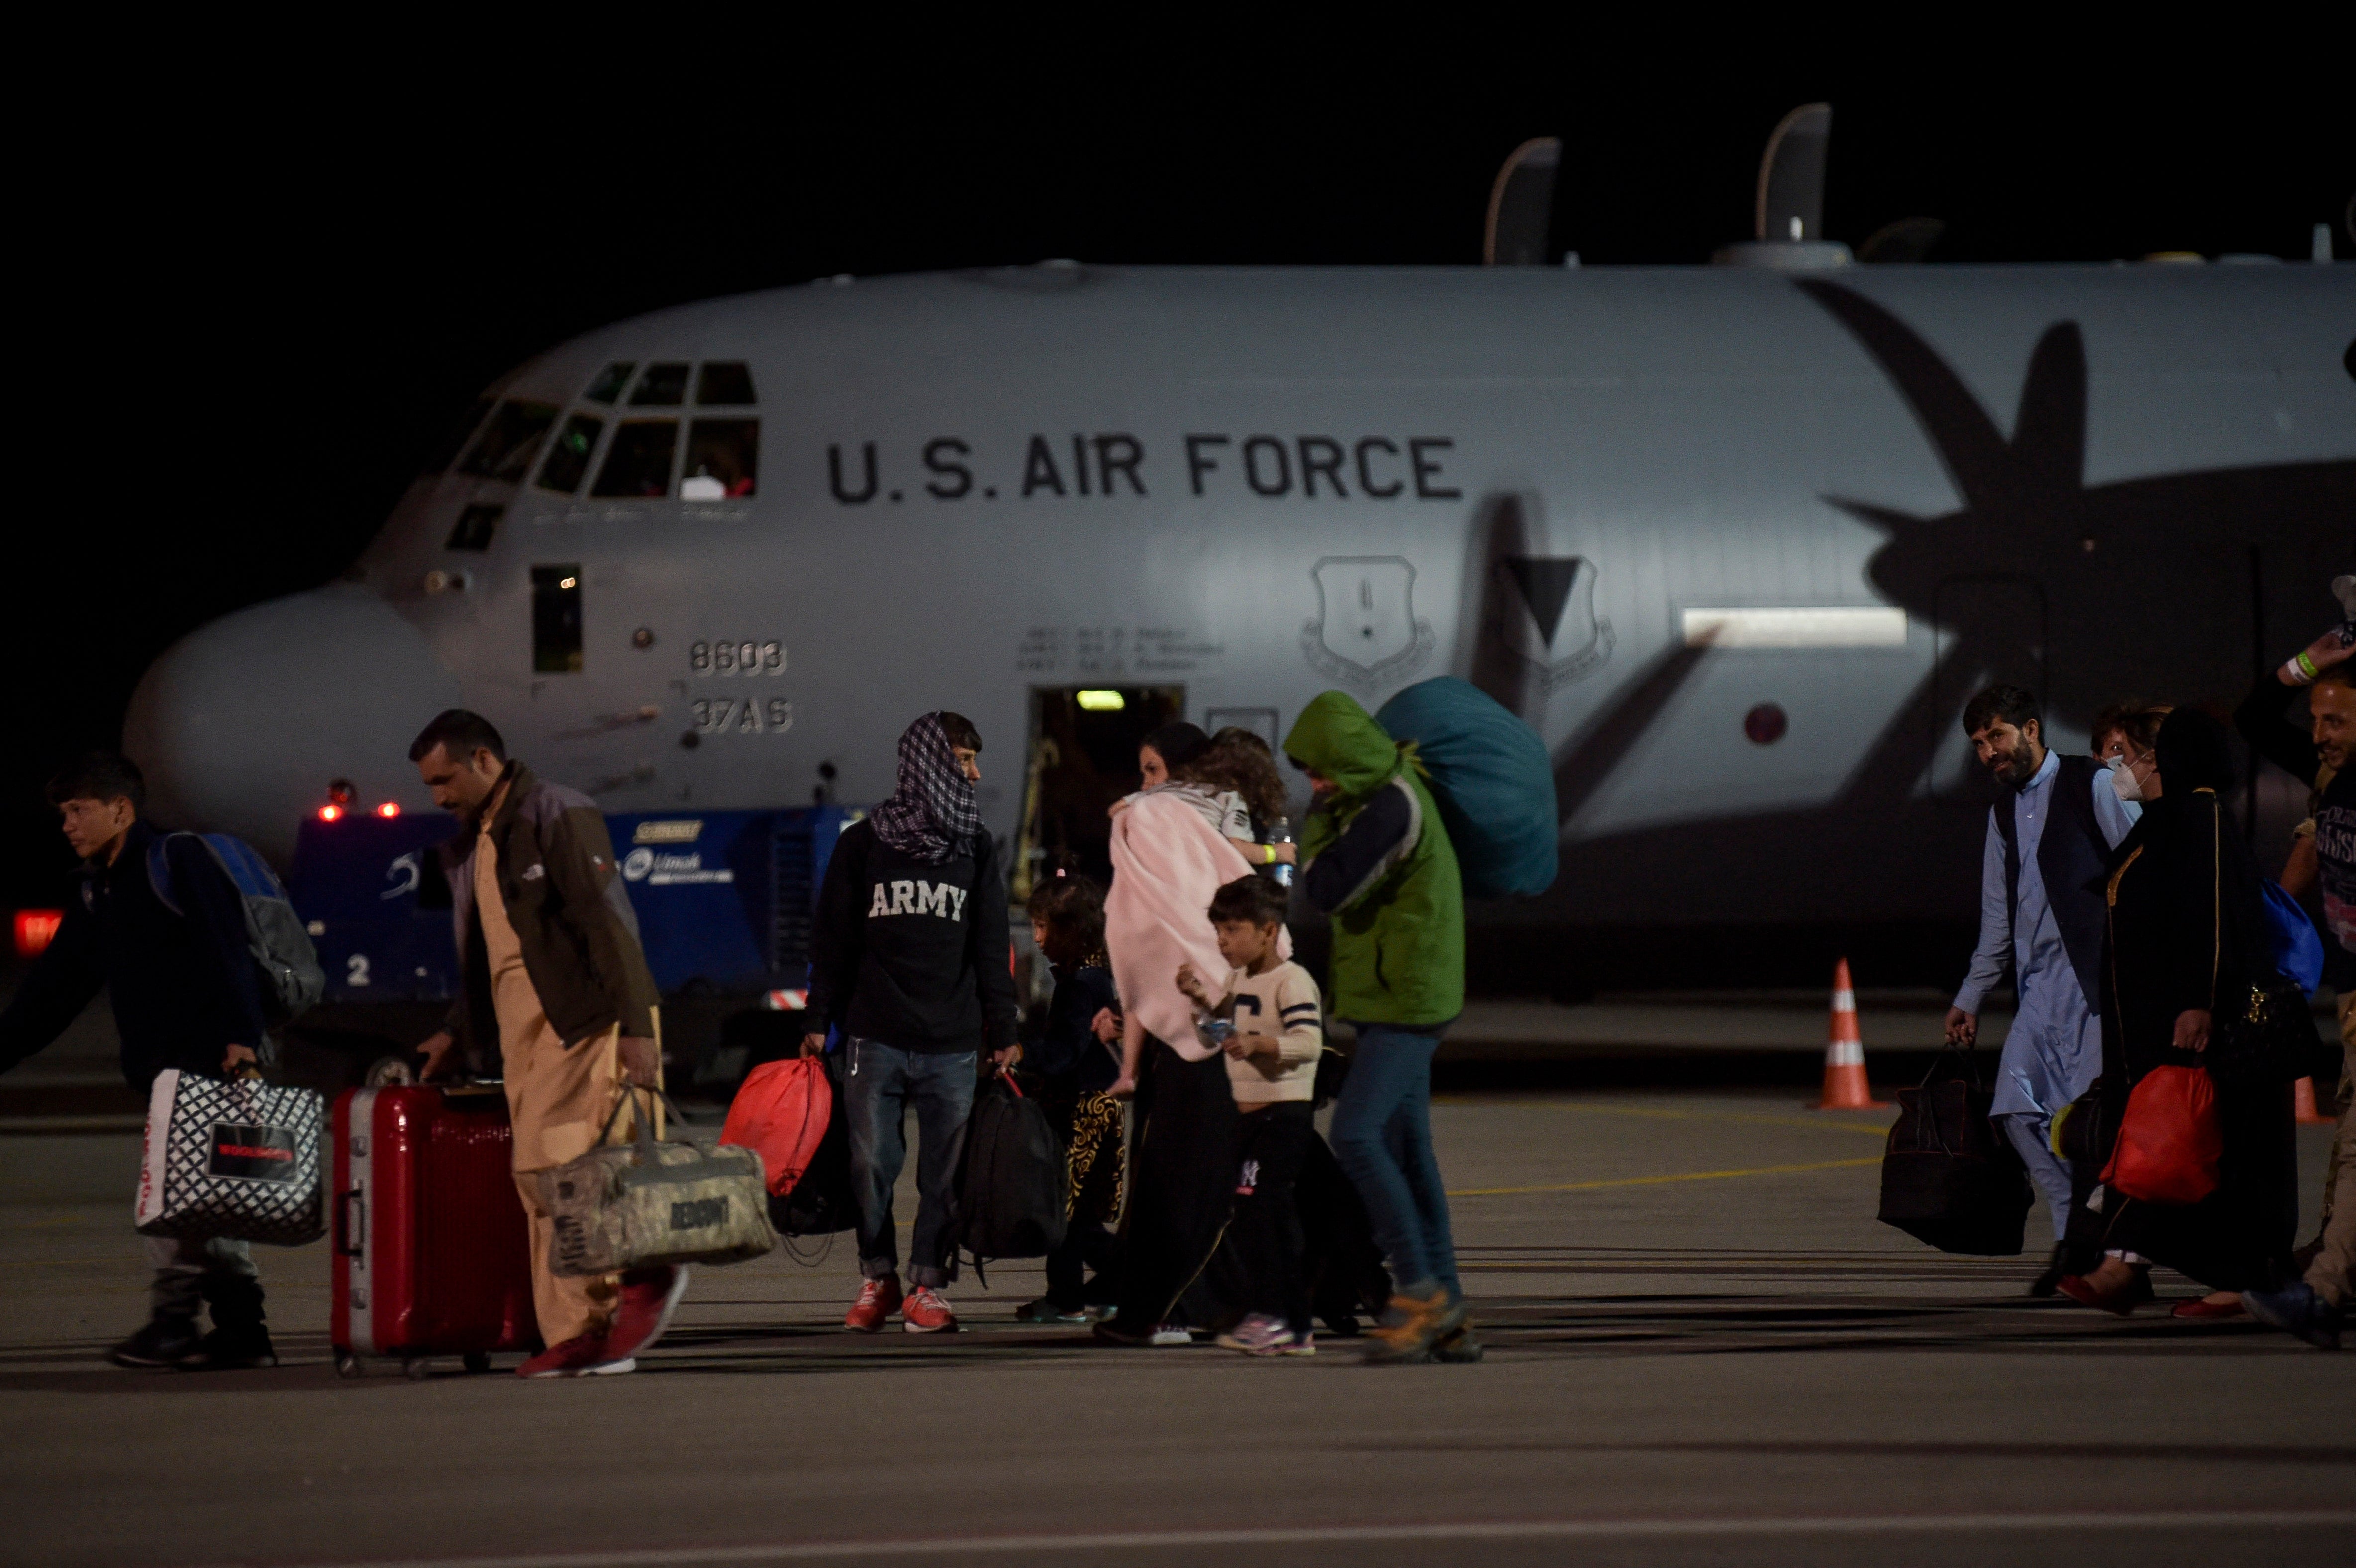 Some refugees boarding planes reportedly do not know where they are heading